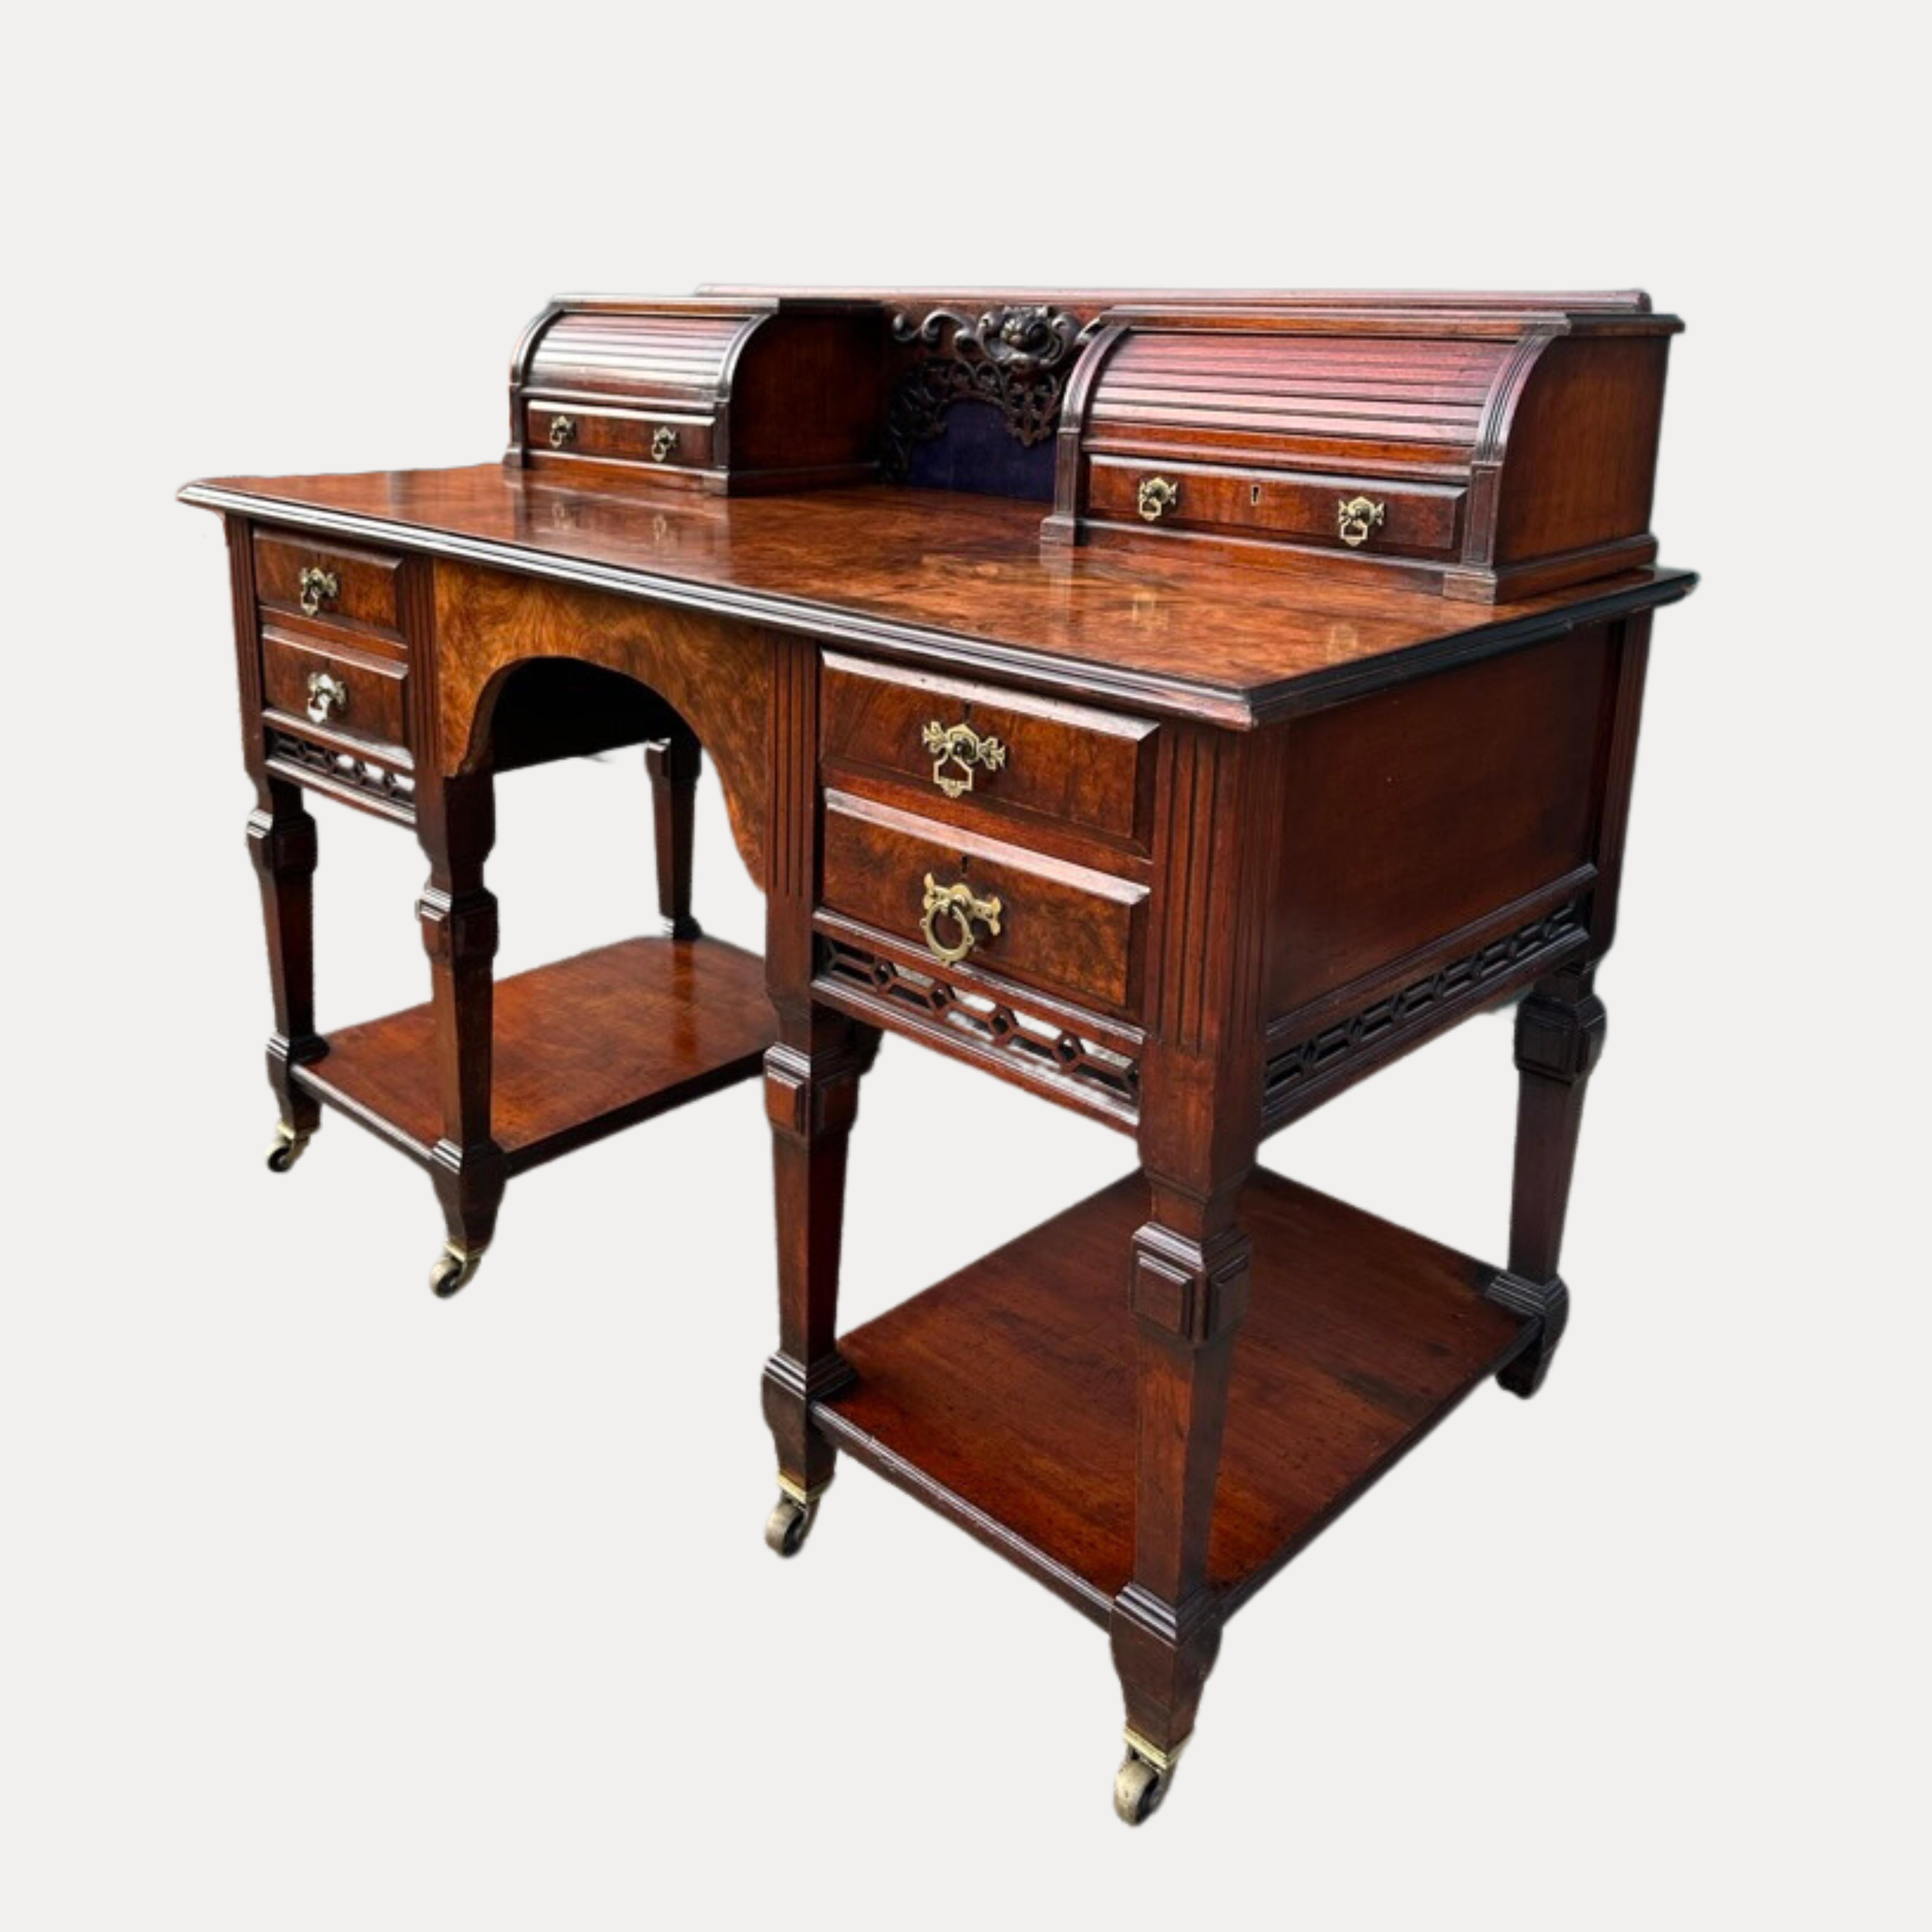 Attractive rare Victorian ladies writing desk with two short drawers below two tambour roll tops, having a highly decorative panel between, supported by a beautiful figured walnut top.
The kneehole has two drawers on either side, flanked by a